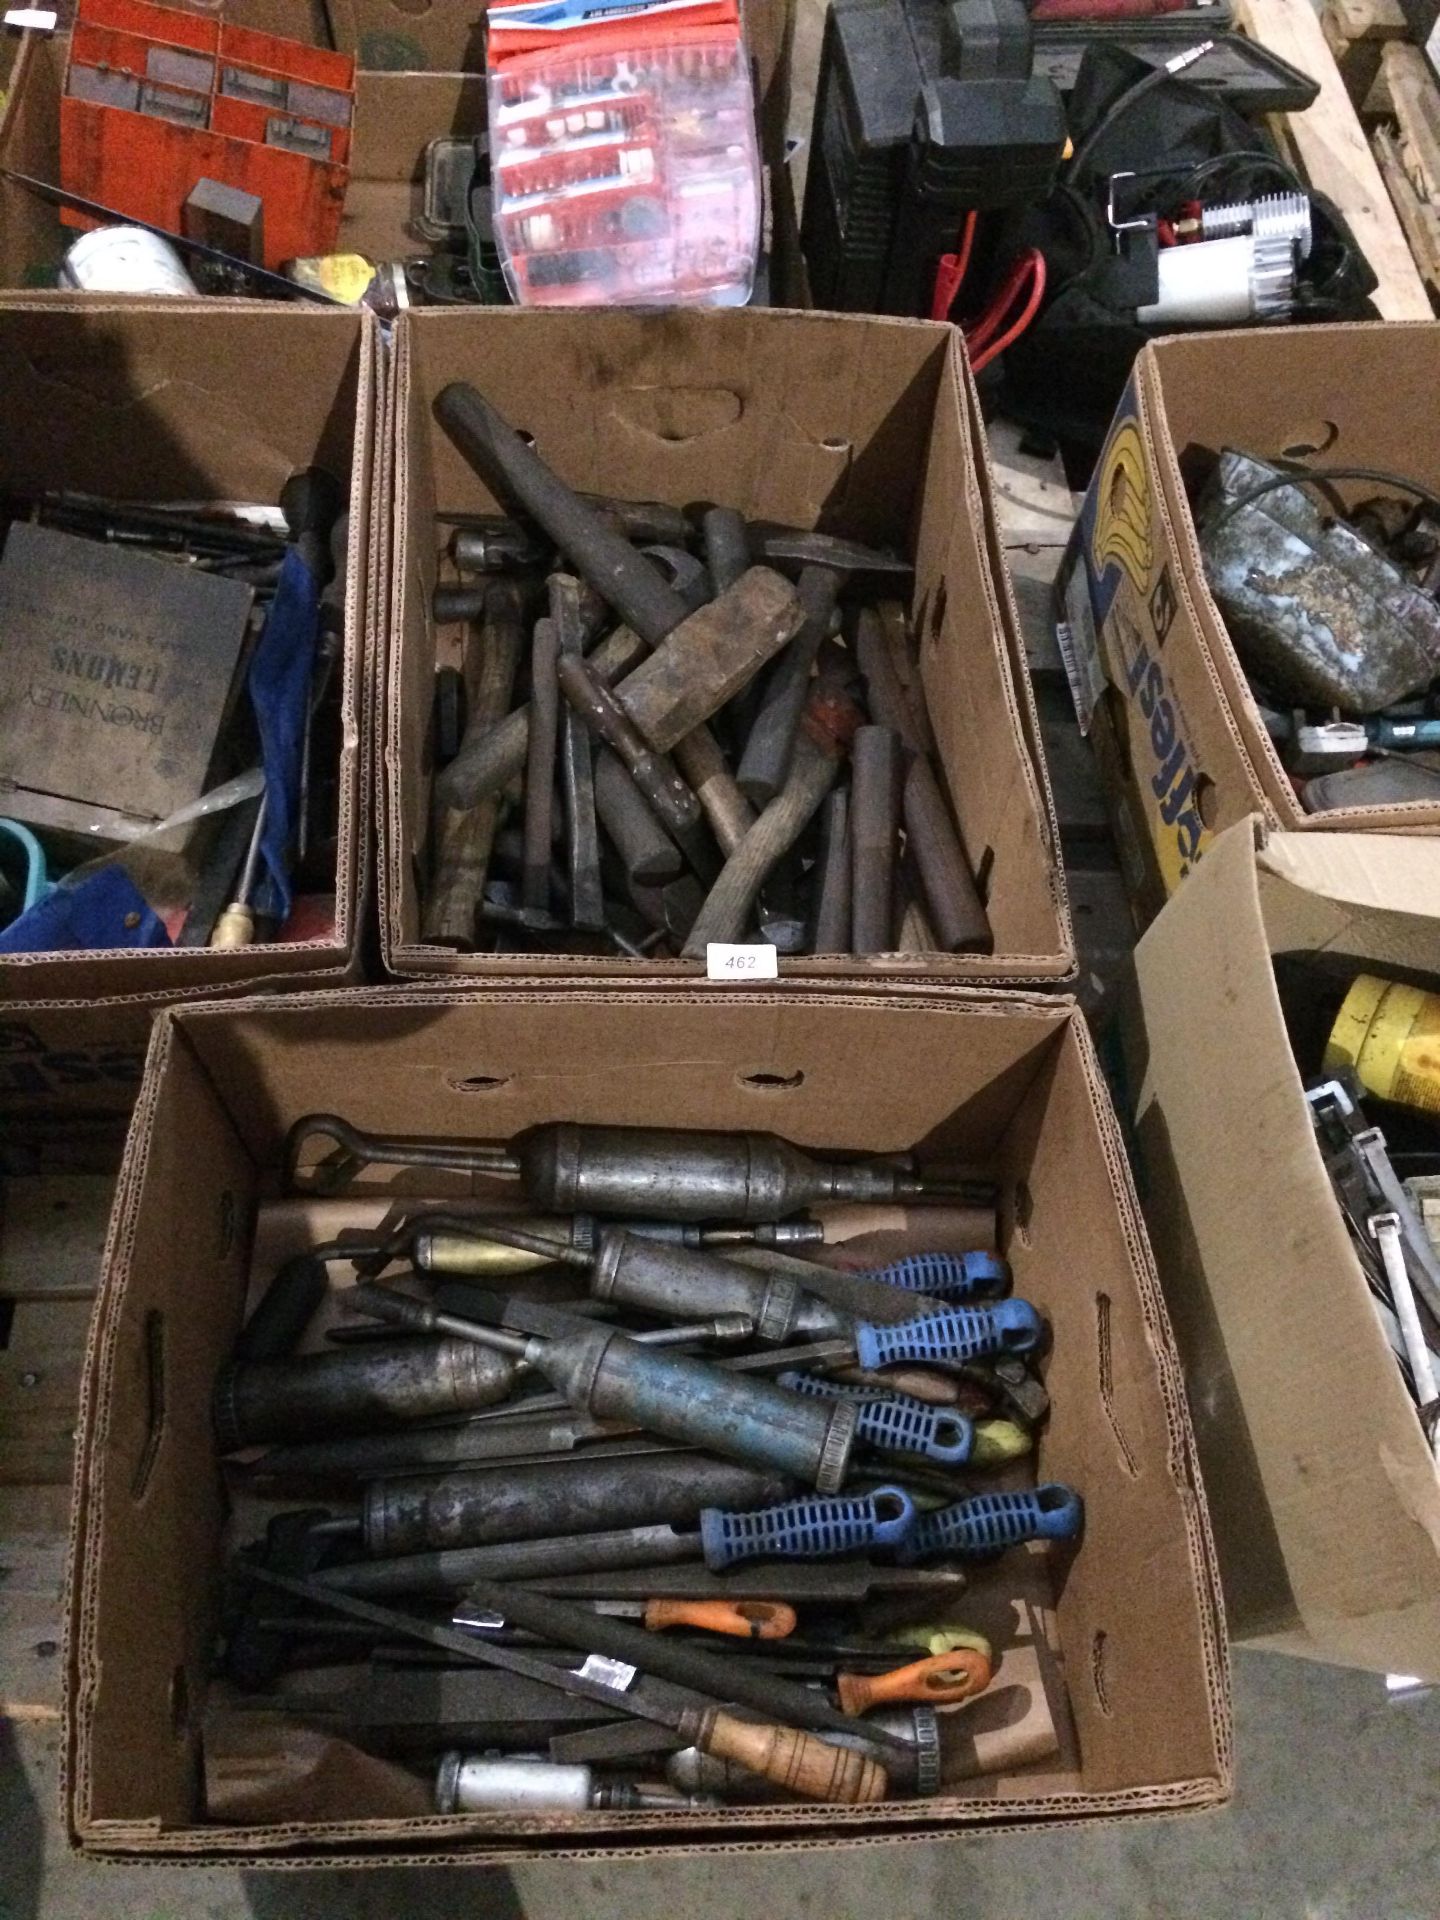 Contents to two boxes - axes, hammers, grease guns, chisels,